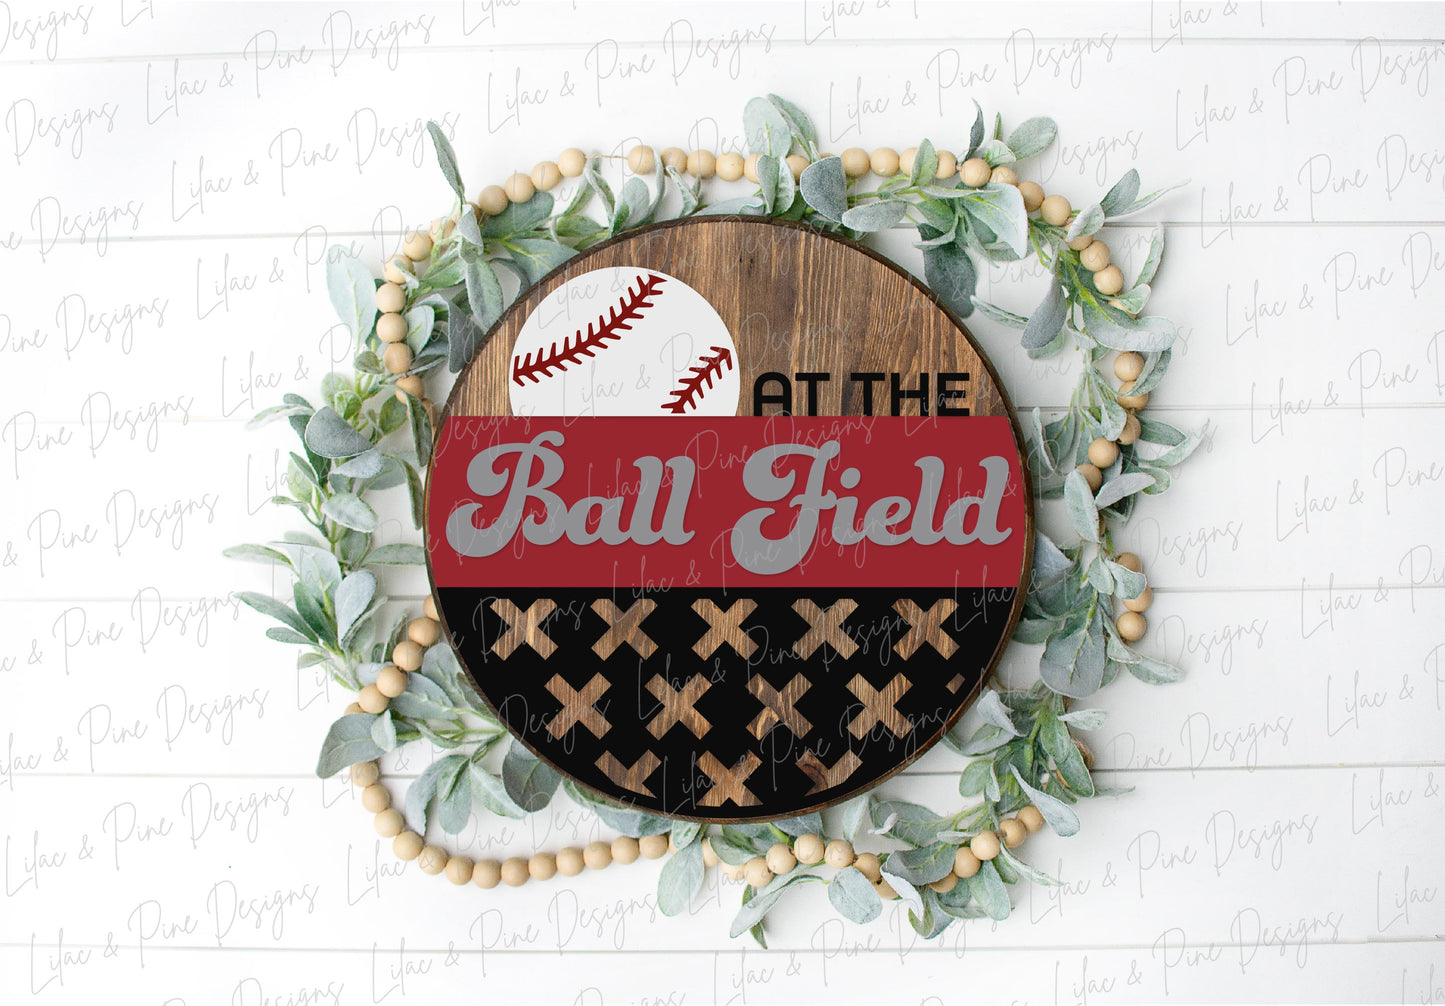 At the Ball Field round sign- baseball sign SVG- door round